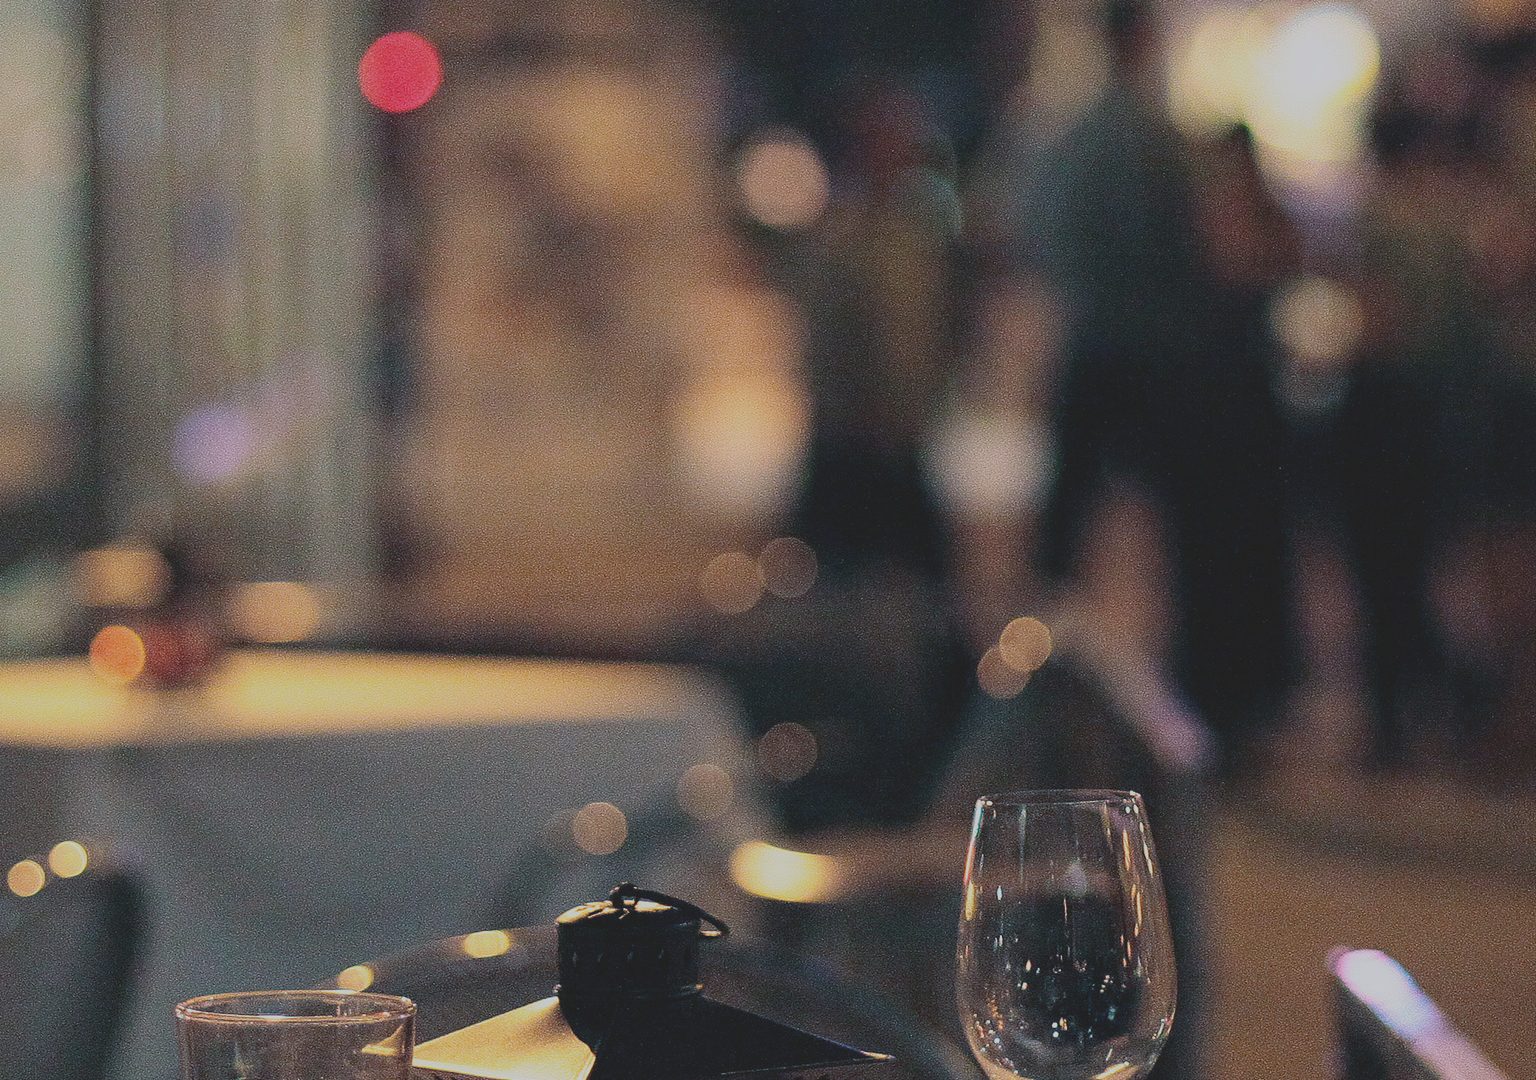 Restaurant table outdoors at nighttime with lantern and wine and water glasses in foreground, bus stop and people on sidewalk can be seen in background